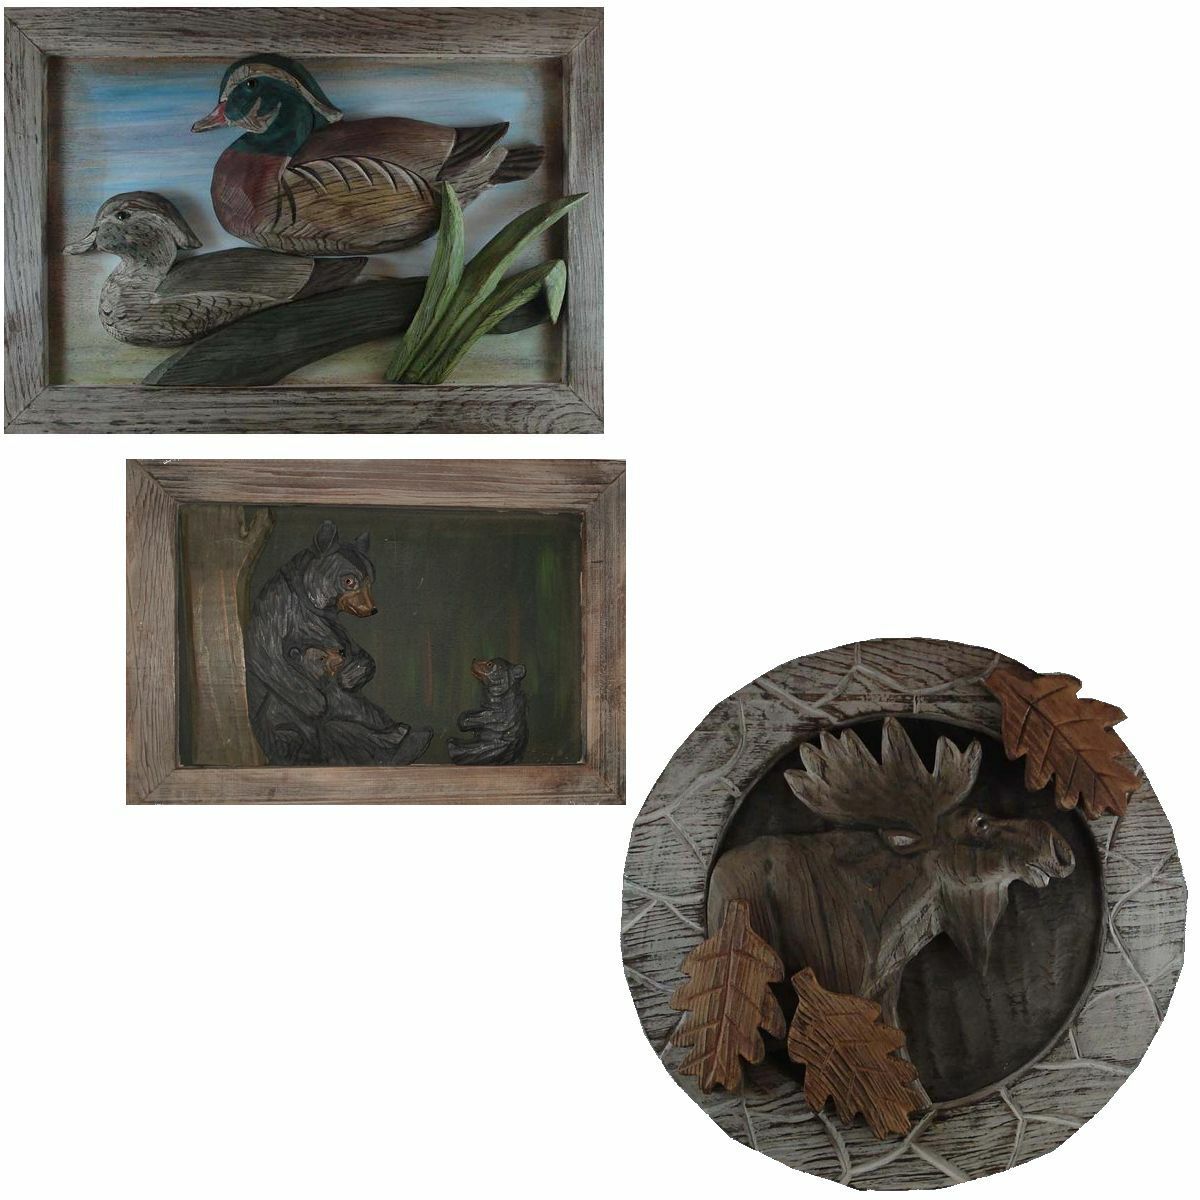 Primary image for New Carved Wood Rustic Decor Wall Plaque Bear Moose or Wood Ducks